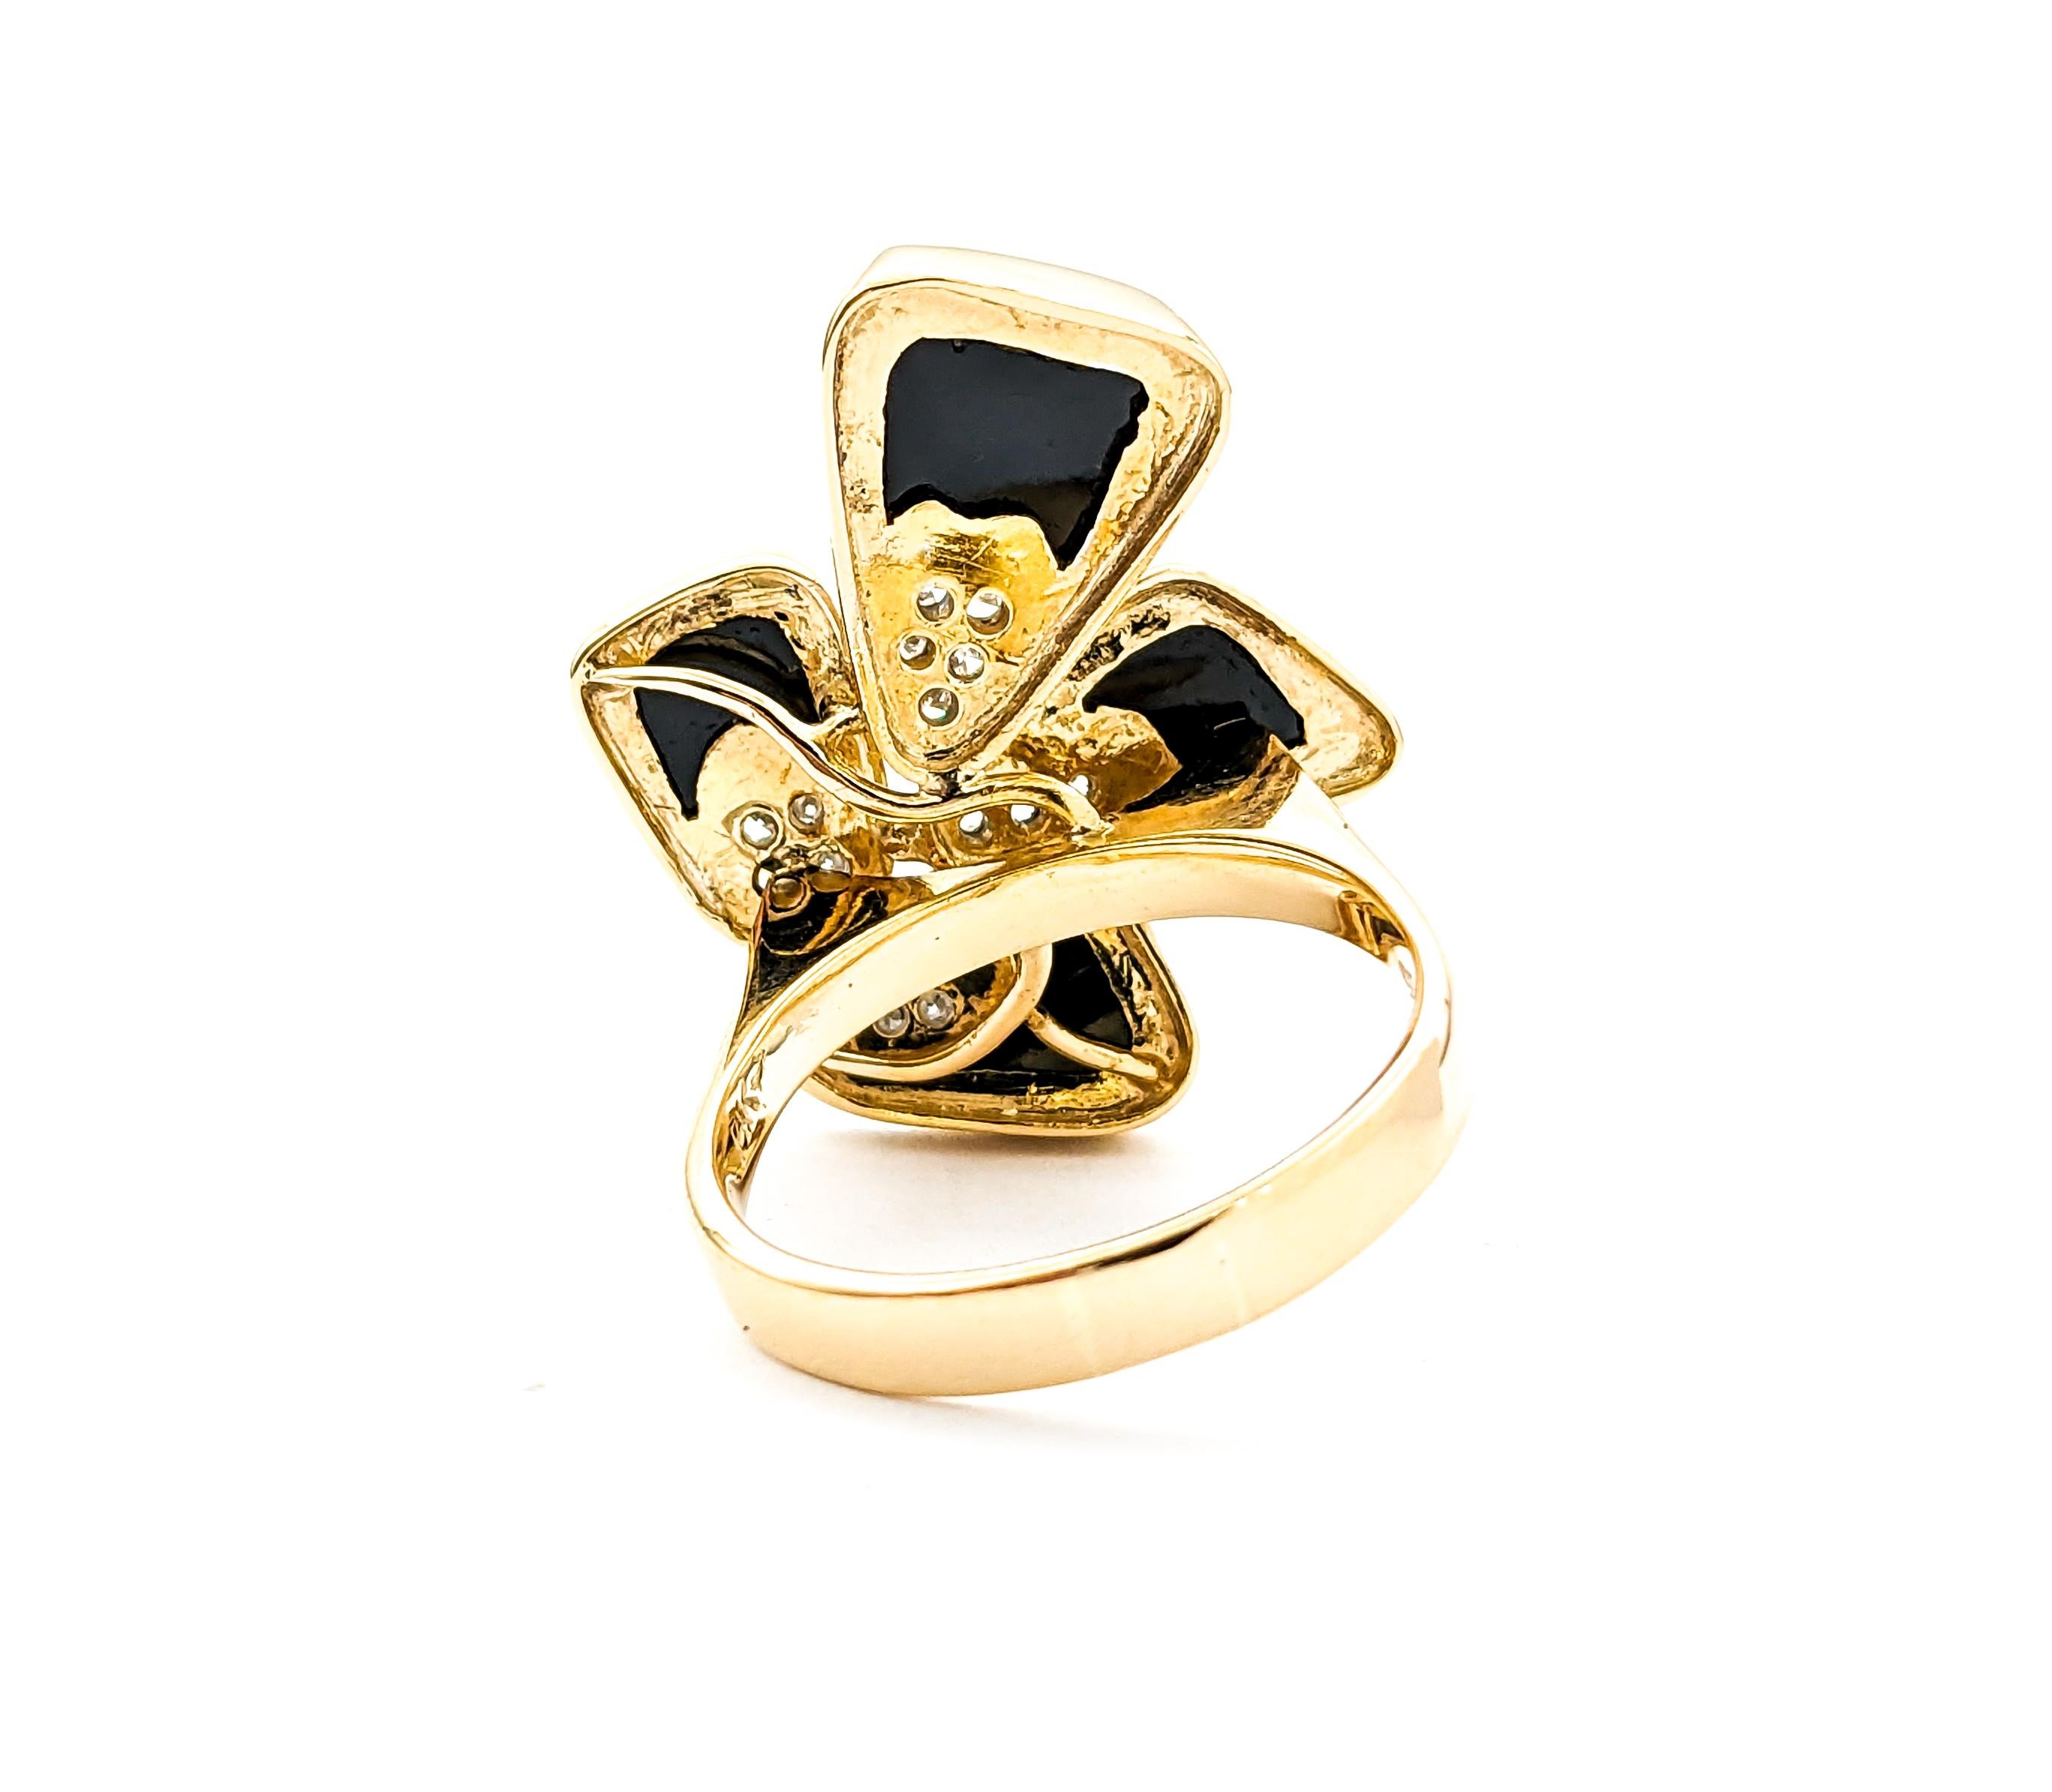 8.5ctw Onyx & Diamond Ring In Yellow Gold For Sale 3